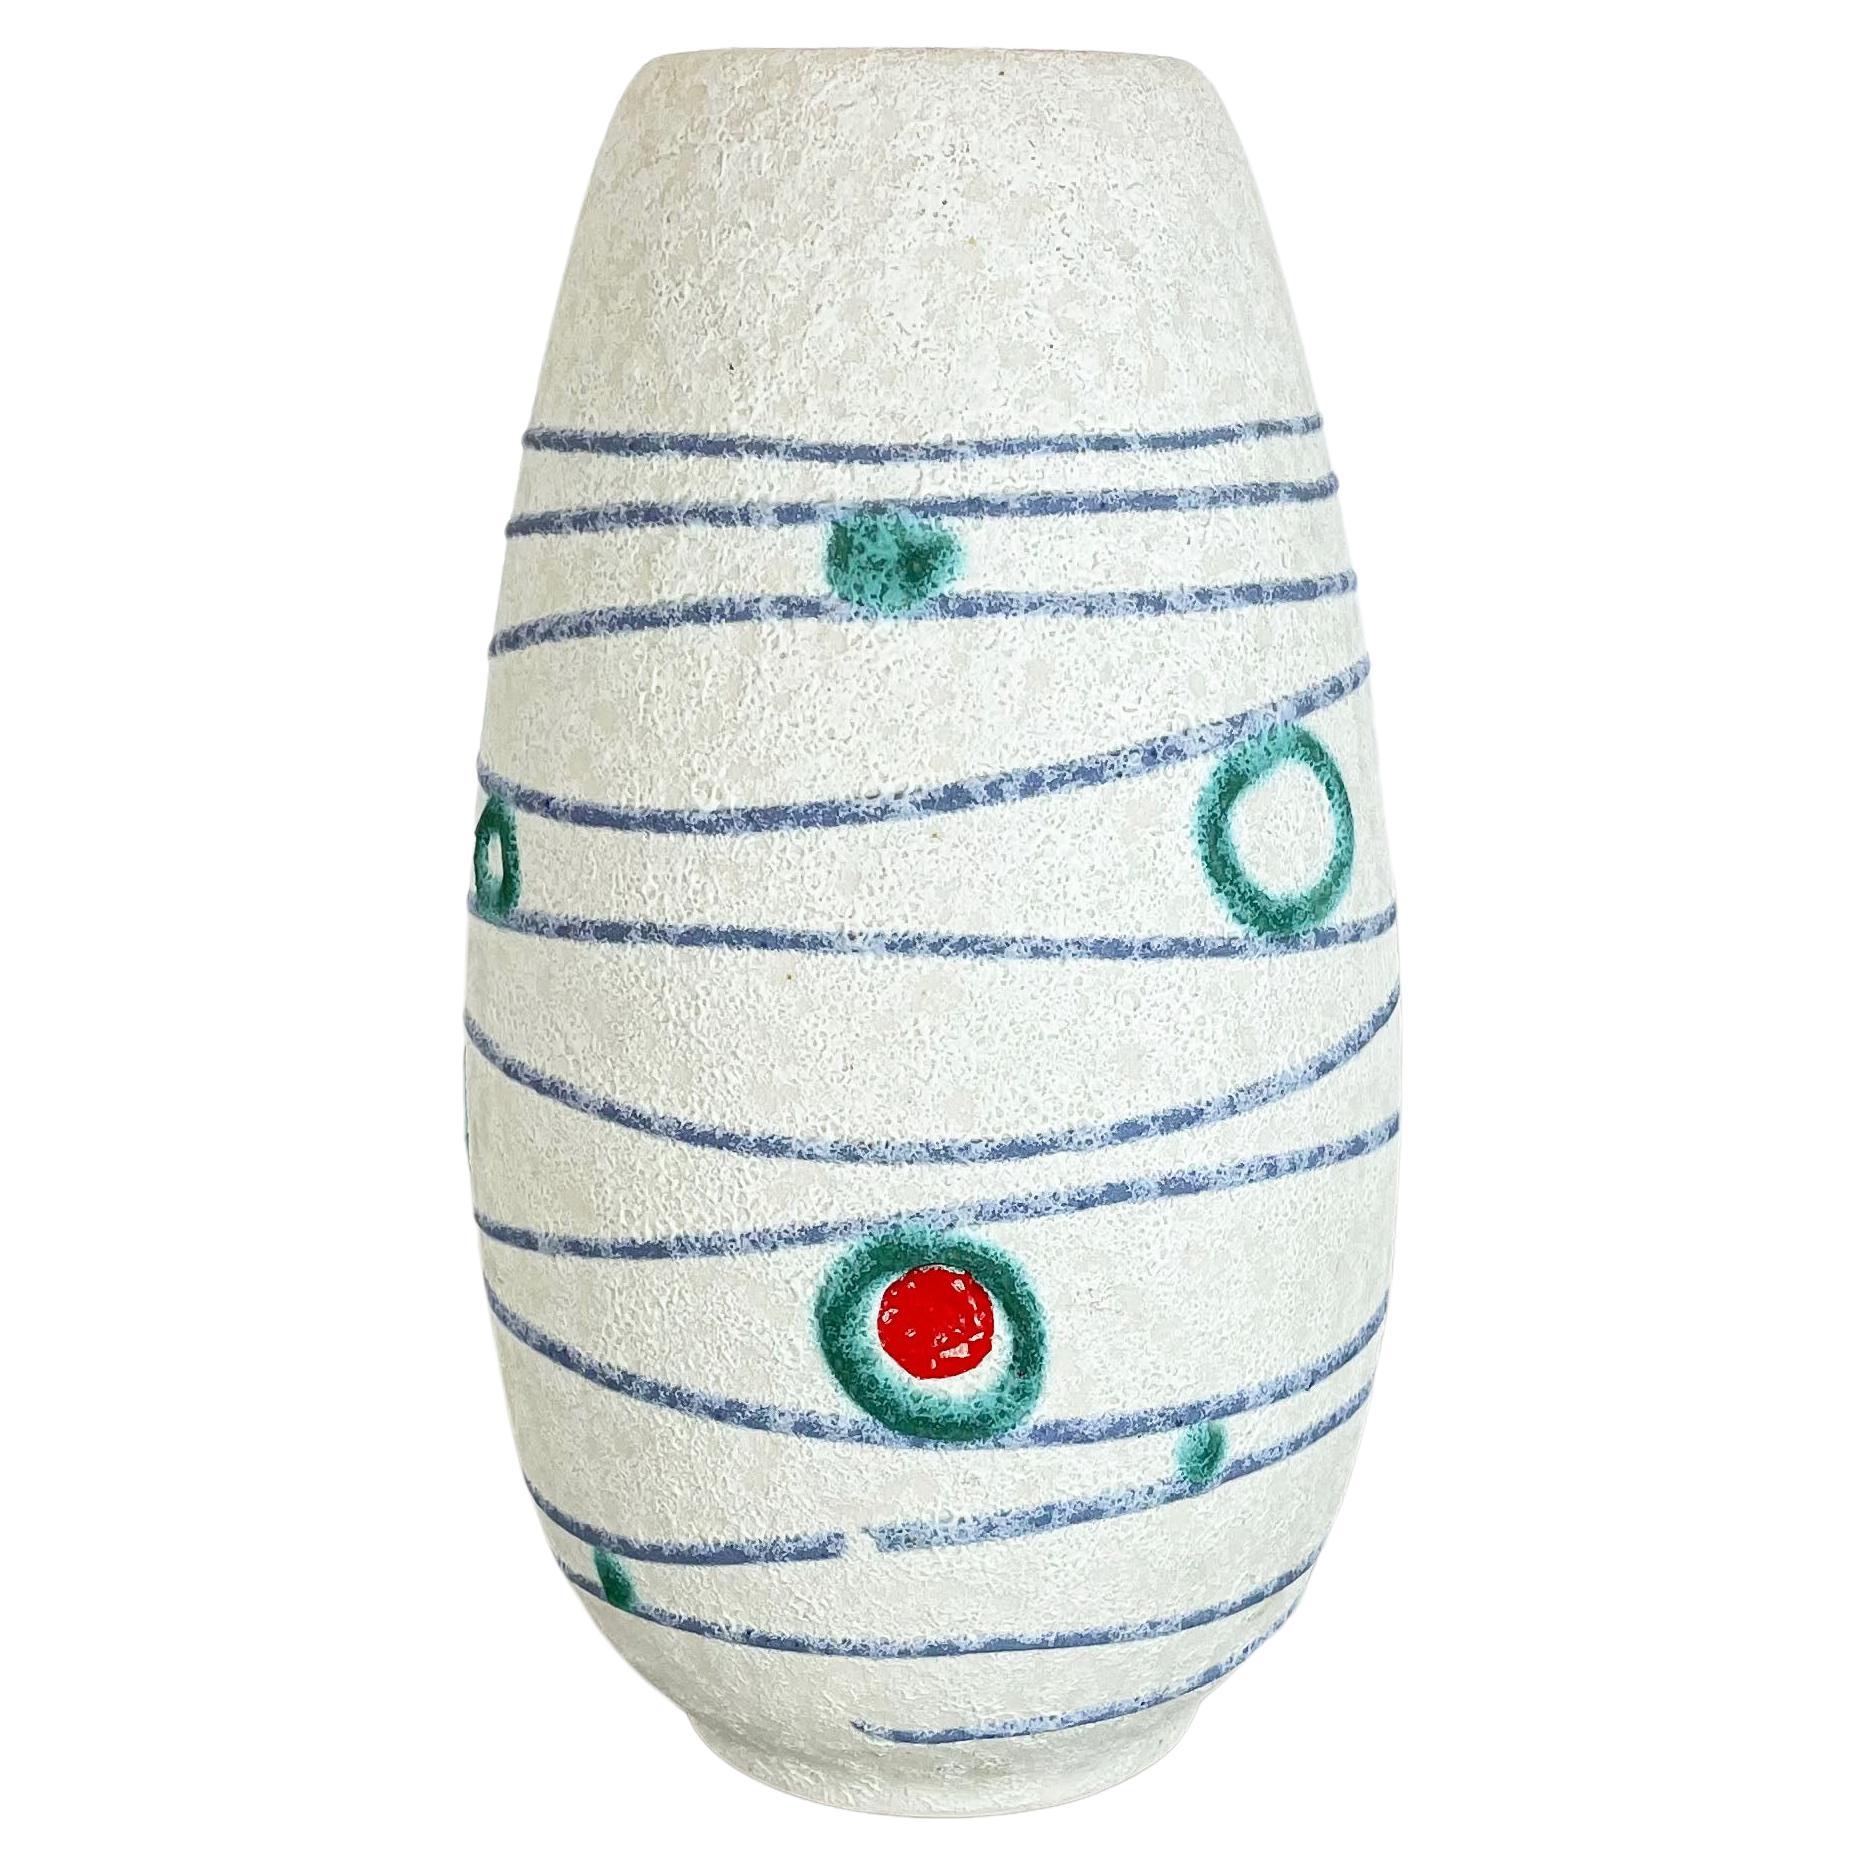 Colorful Fat Lava Pottery "Stripe and Dots" Vase Jasba Ceramics, Germany, 1950s For Sale